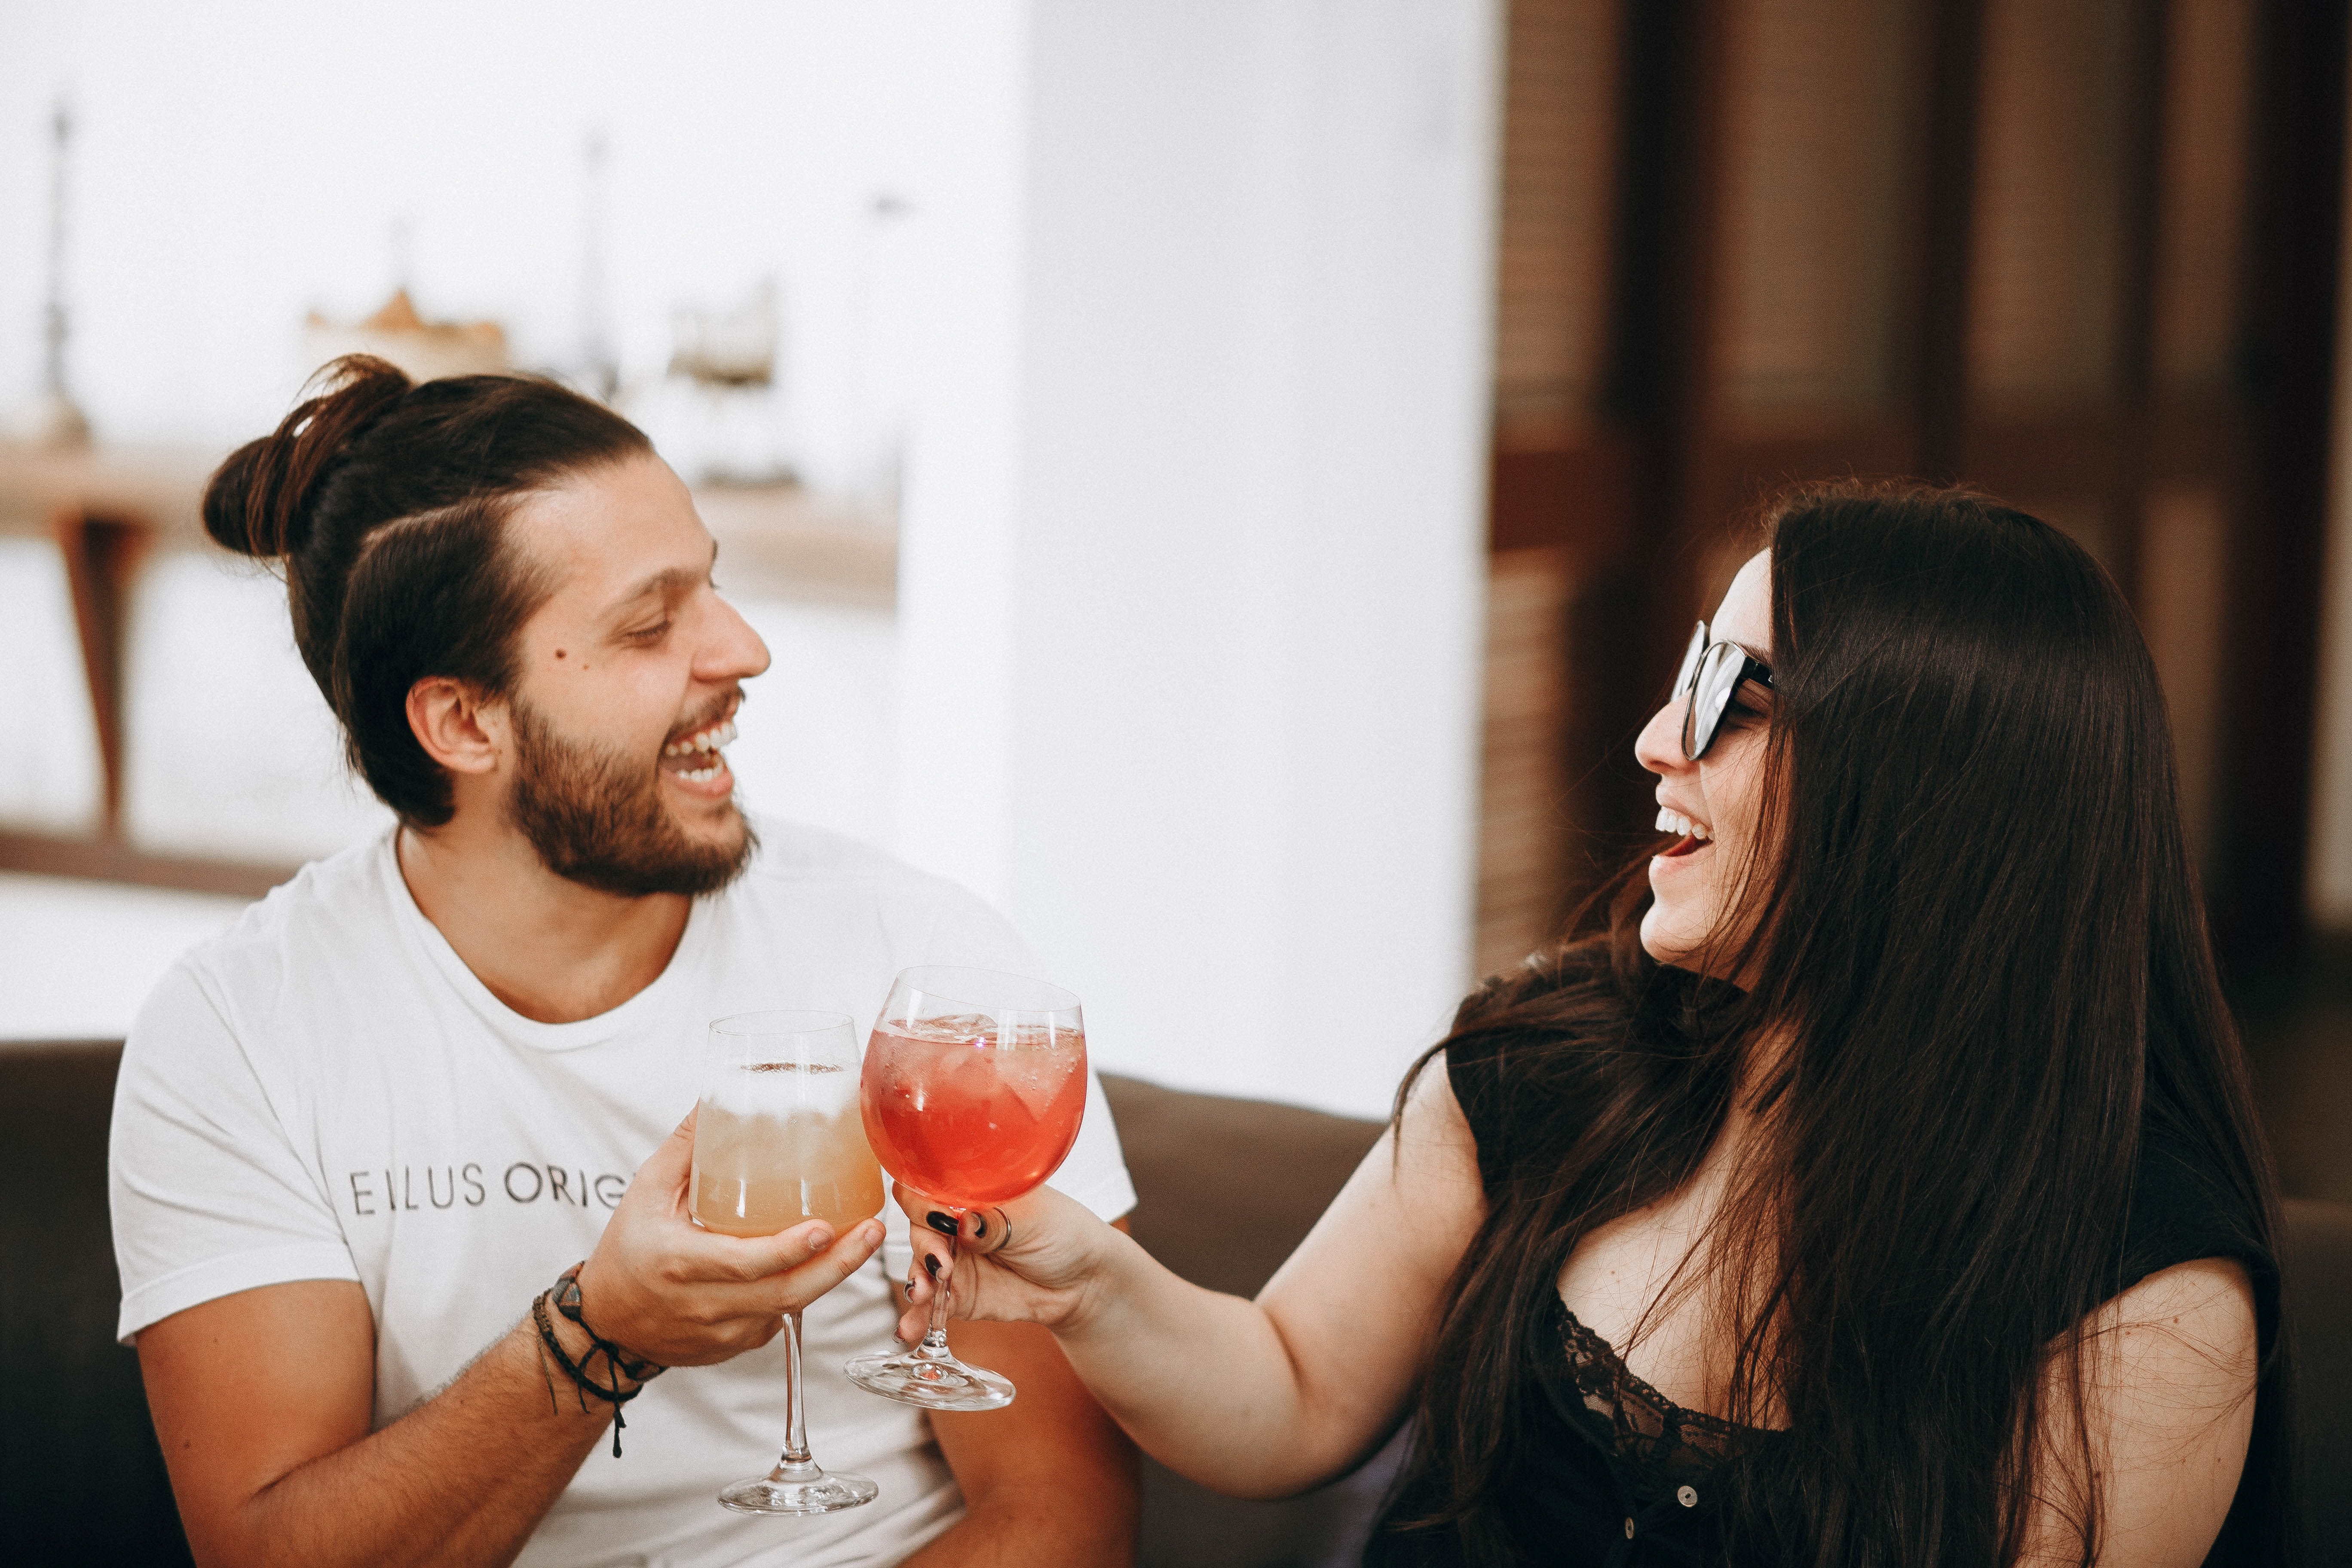 5 Unexpected Popular Types of Dating